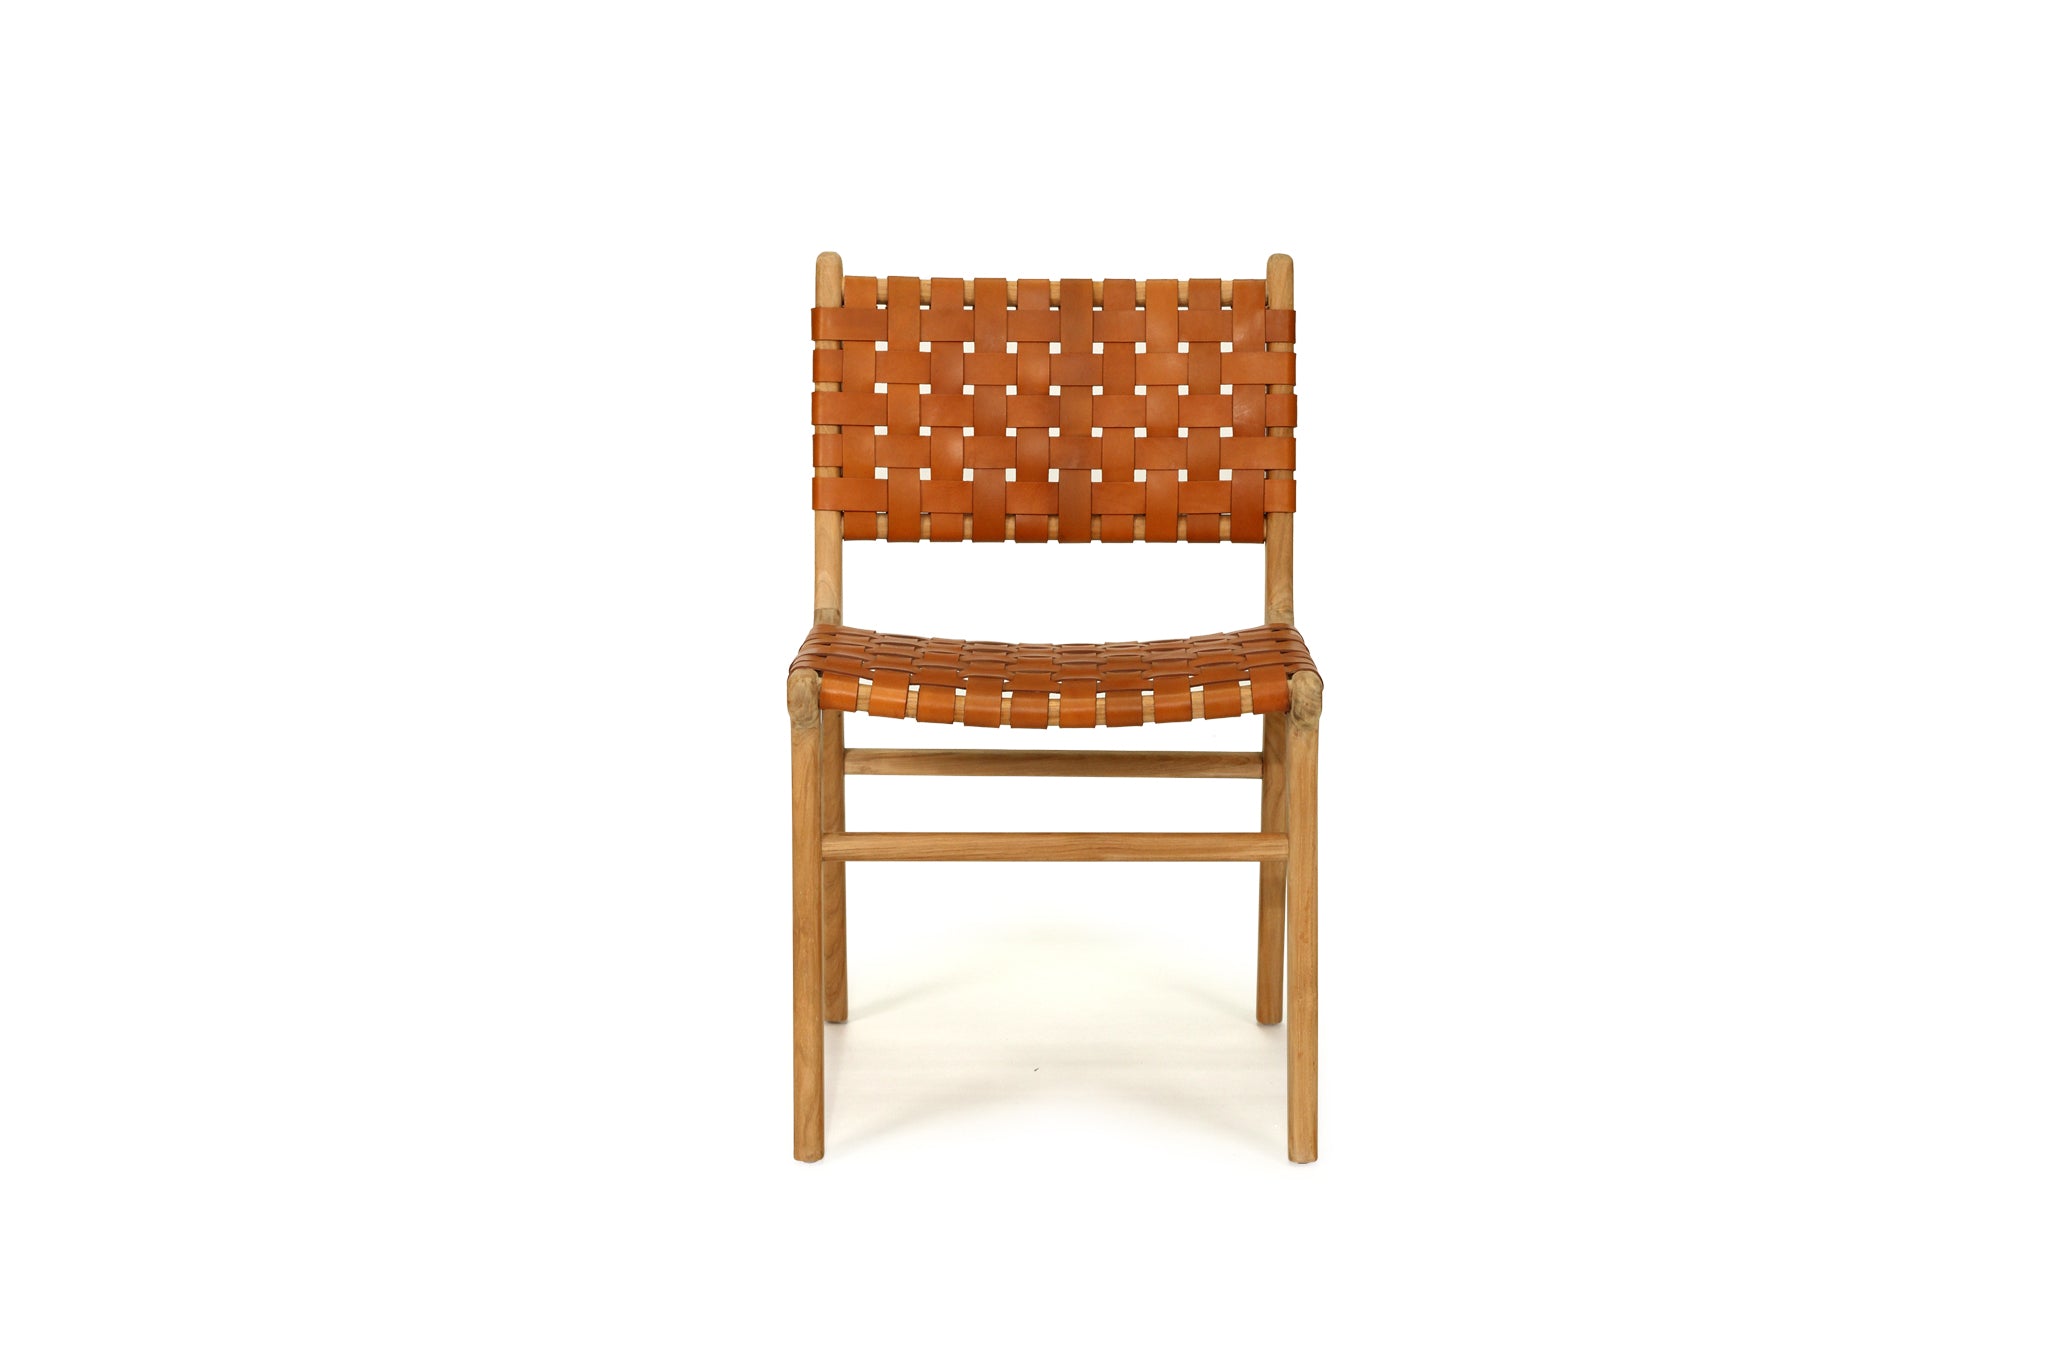 South Bank Woven Leather Side Chair – Tan